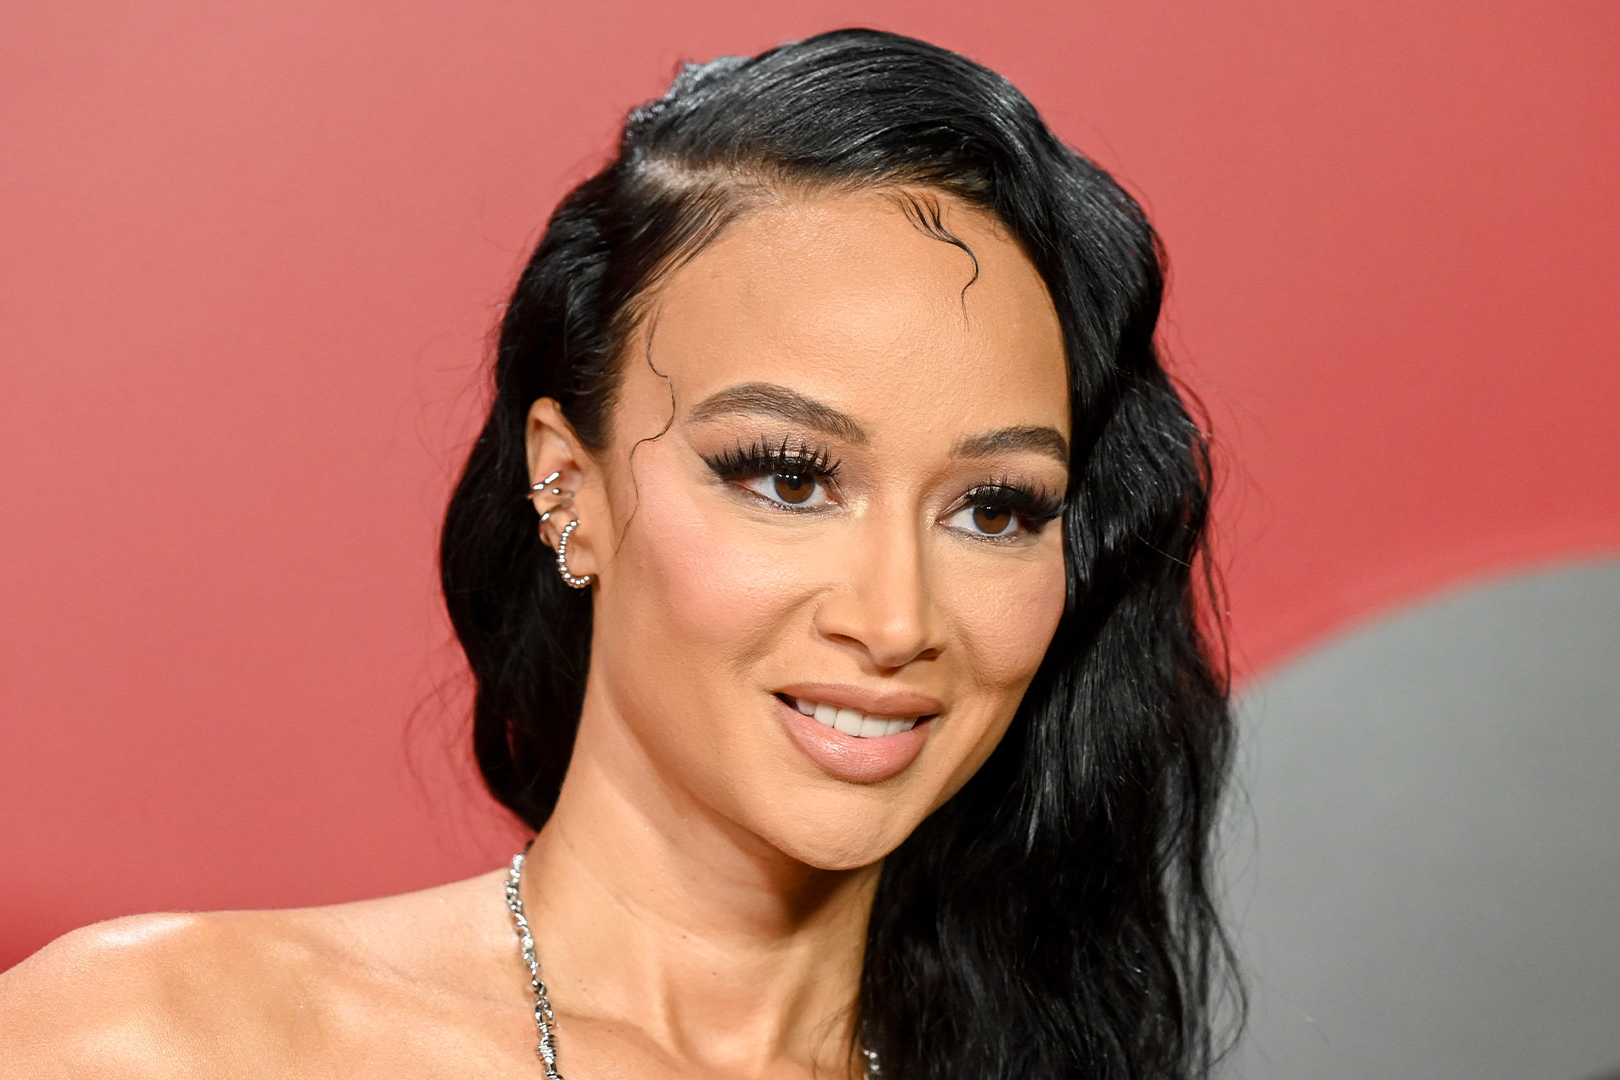 Draya’s Youngest Son, Jru, Is Being Raised by a White Family